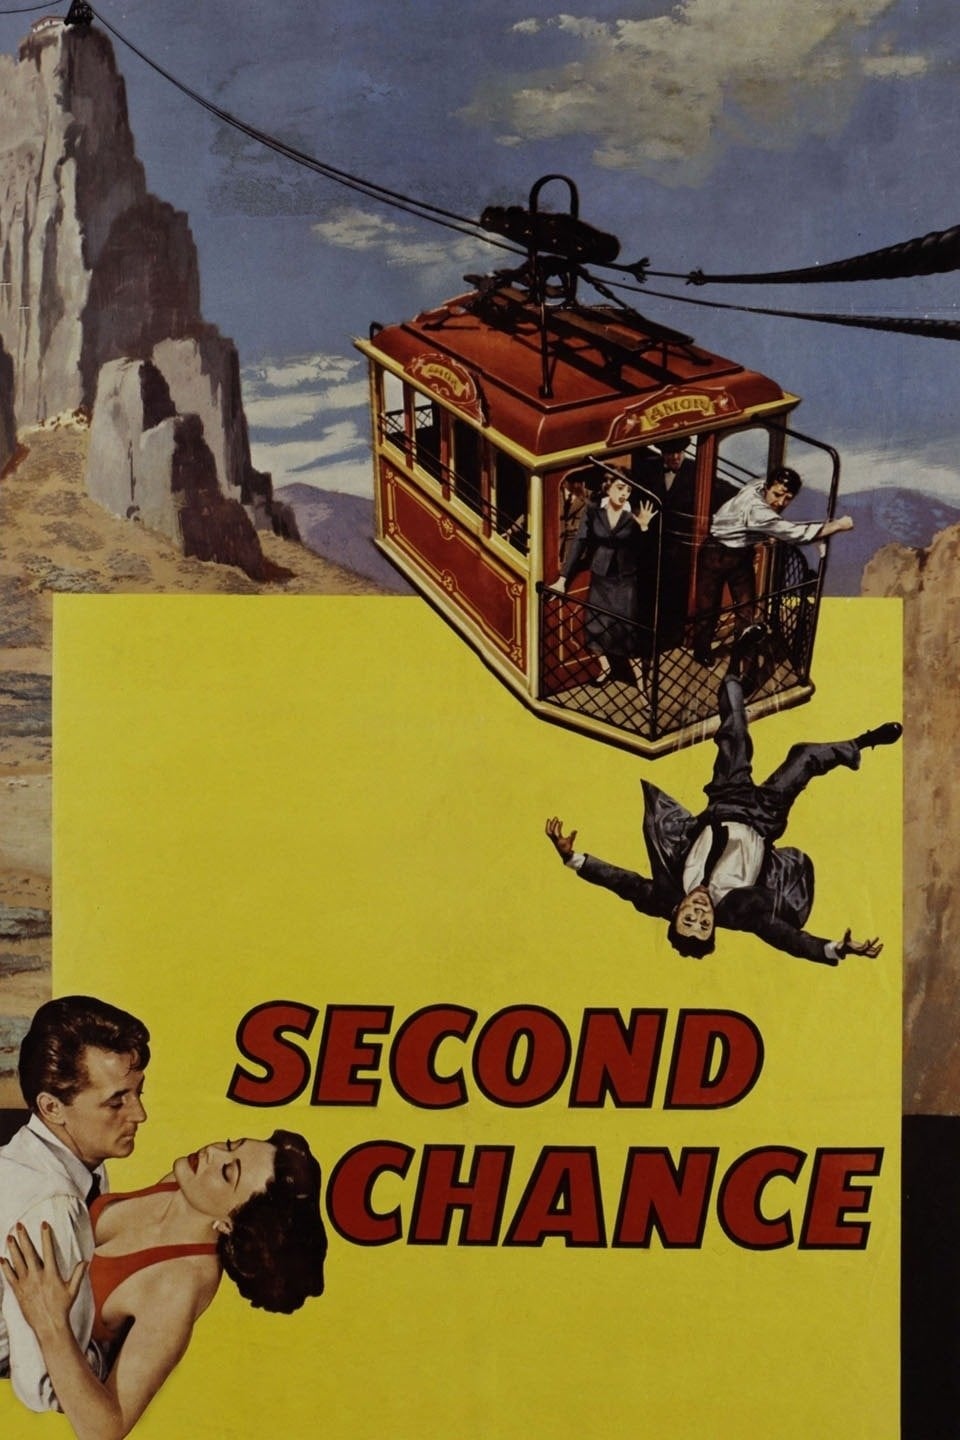 Second Chance (1953)